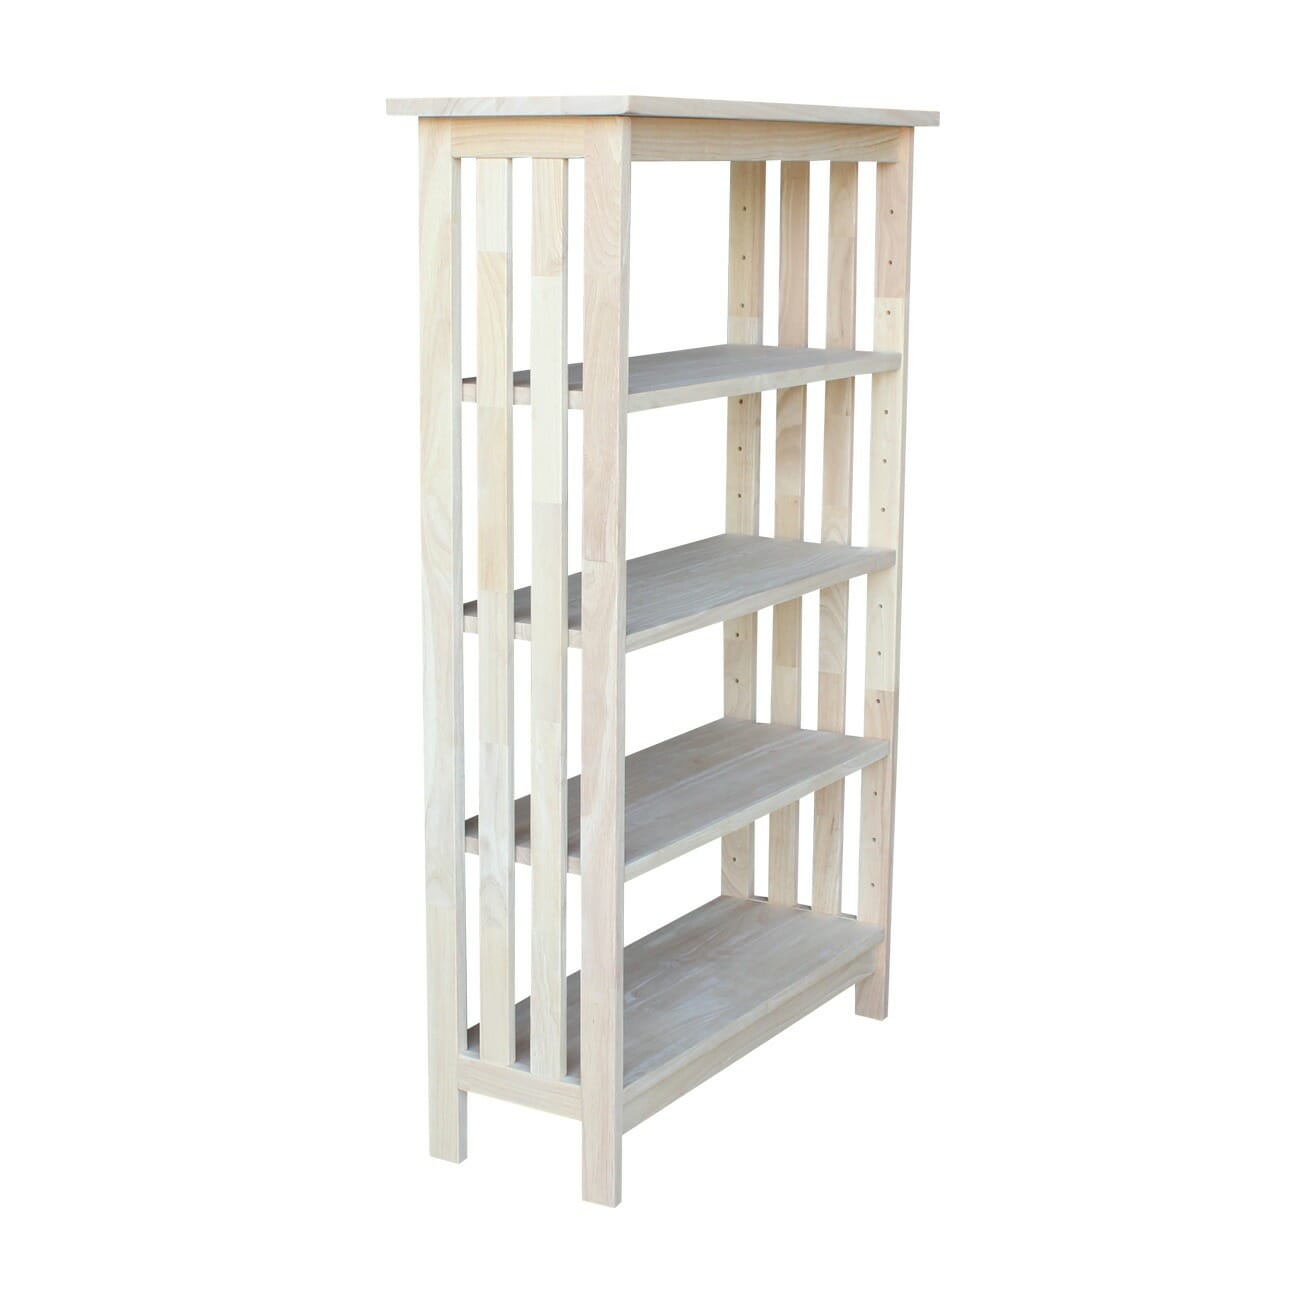 Sh 4830m 48 Inch Tall Mission Bookcase, 48 Inch Tall White Bookcase